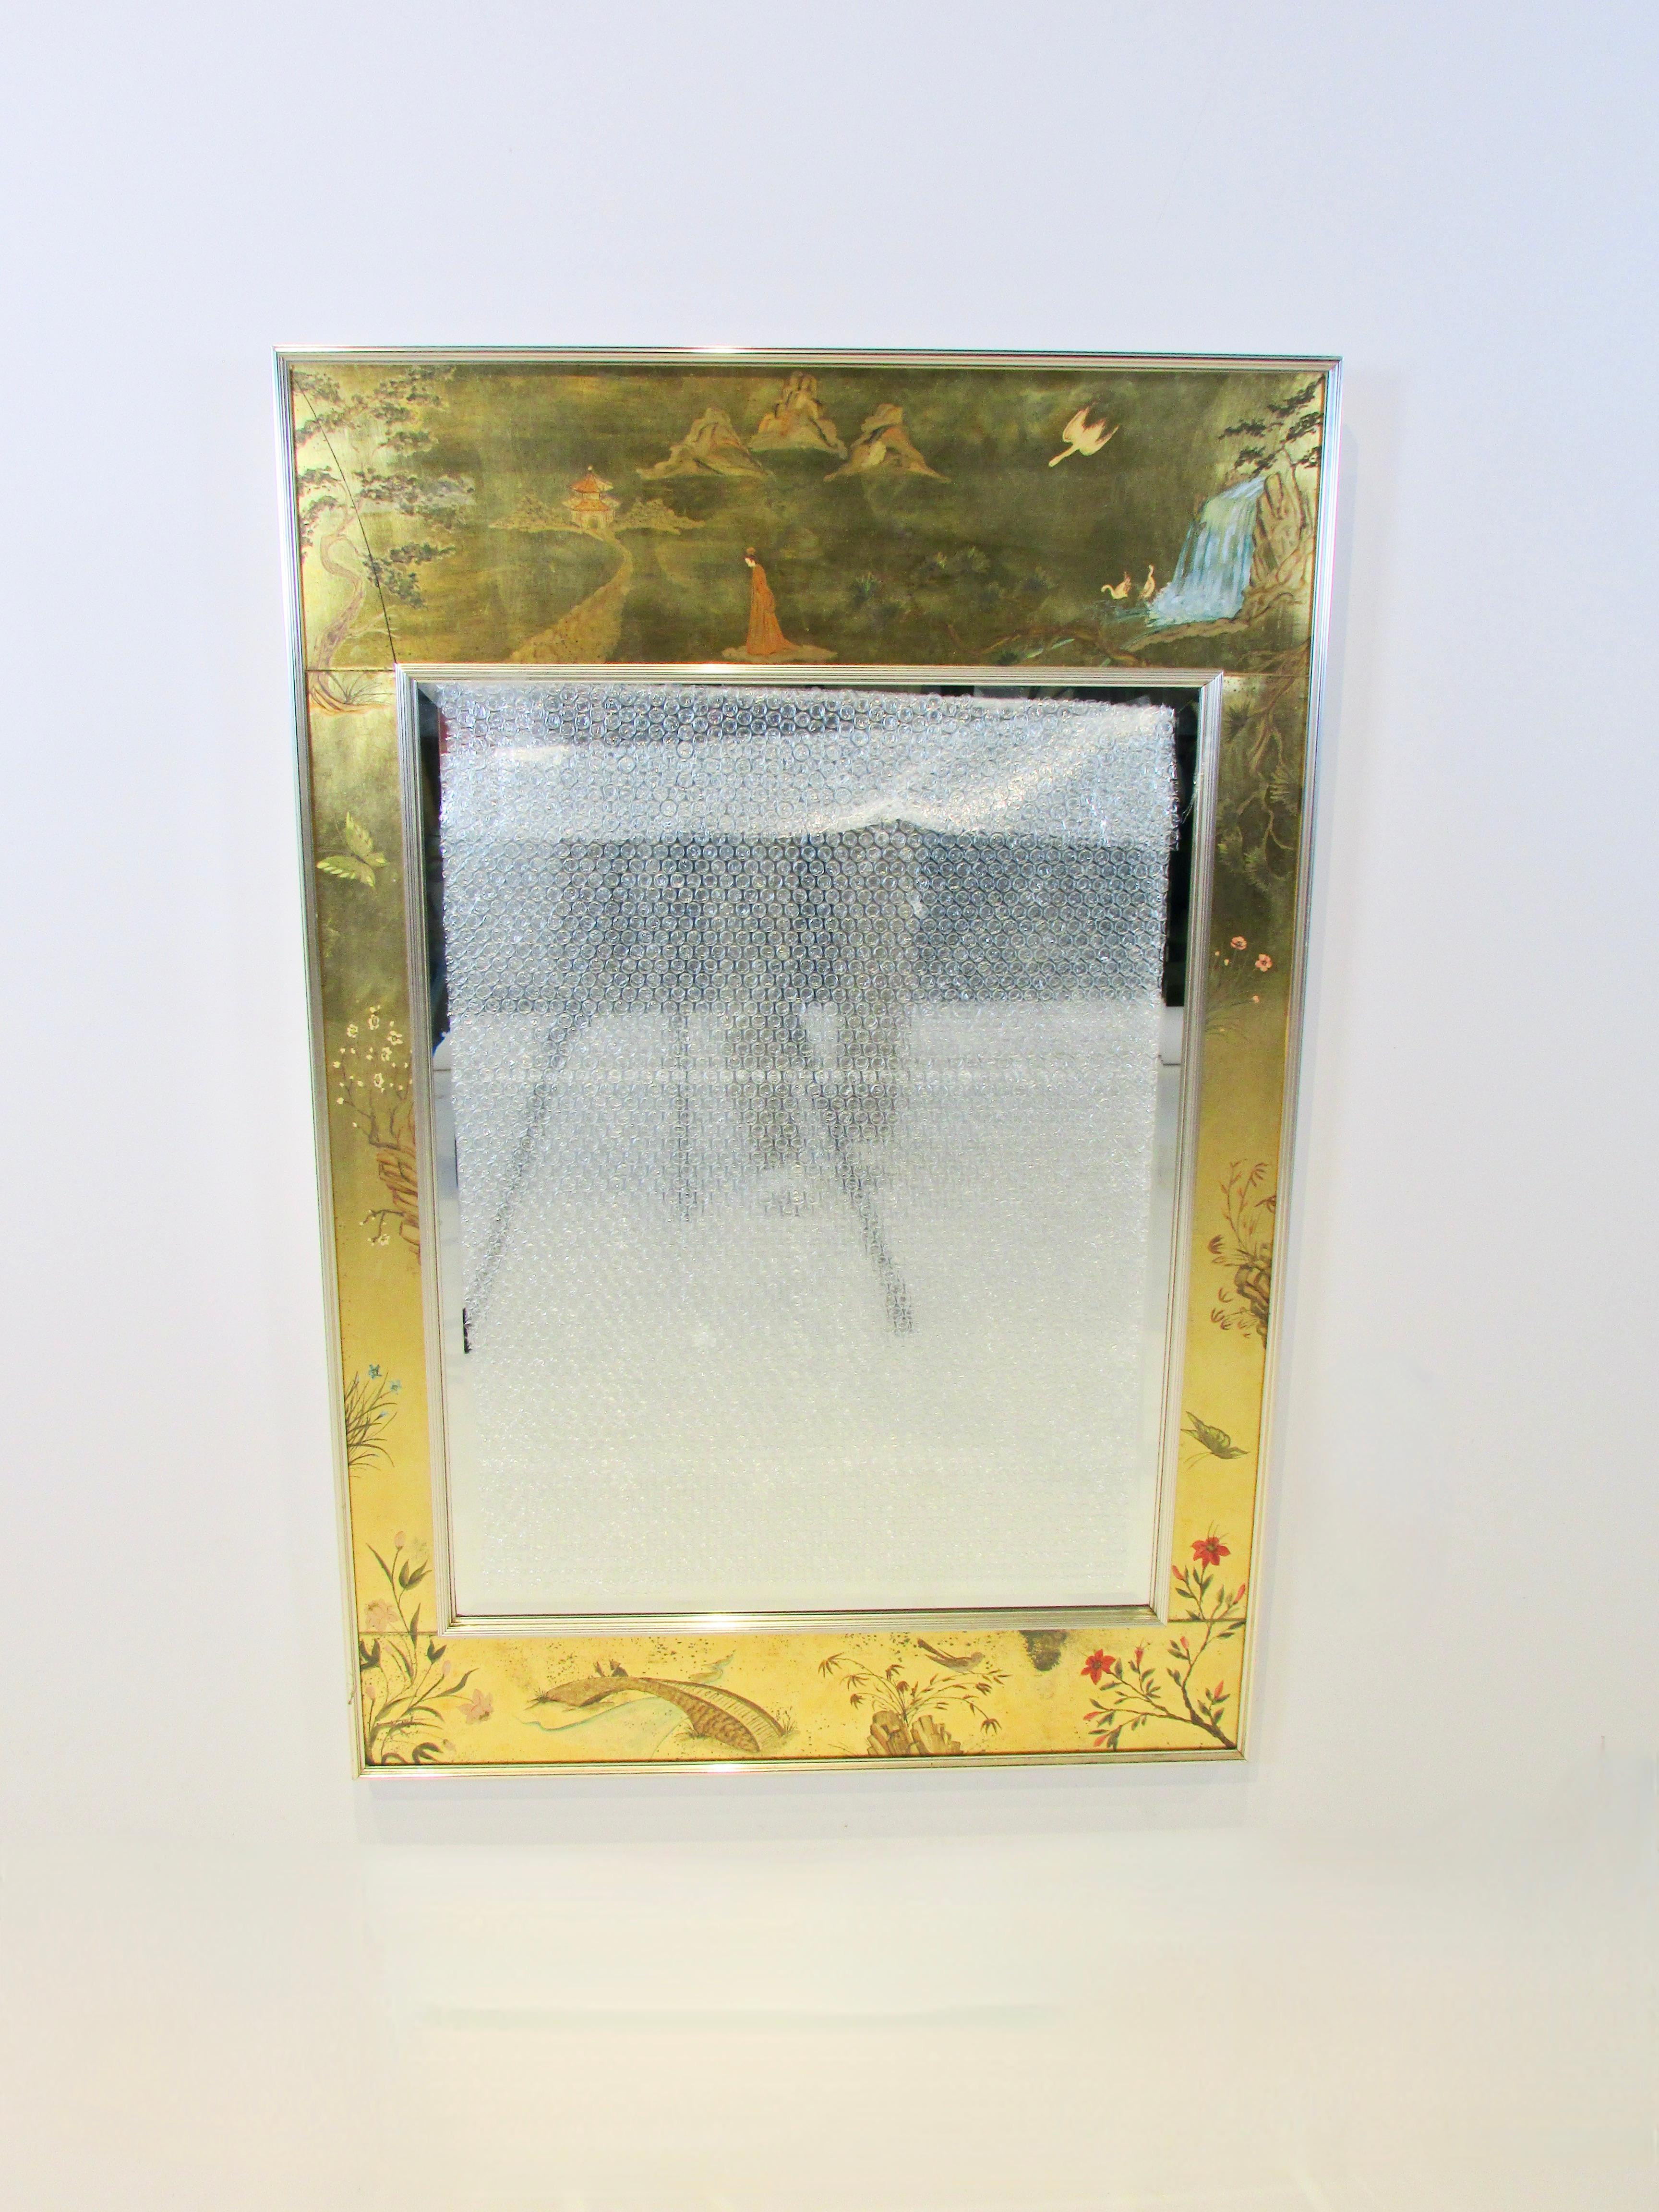 Asian themed LaBarge wall hanging mirror with gold leaf trim In Good Condition For Sale In Ferndale, MI